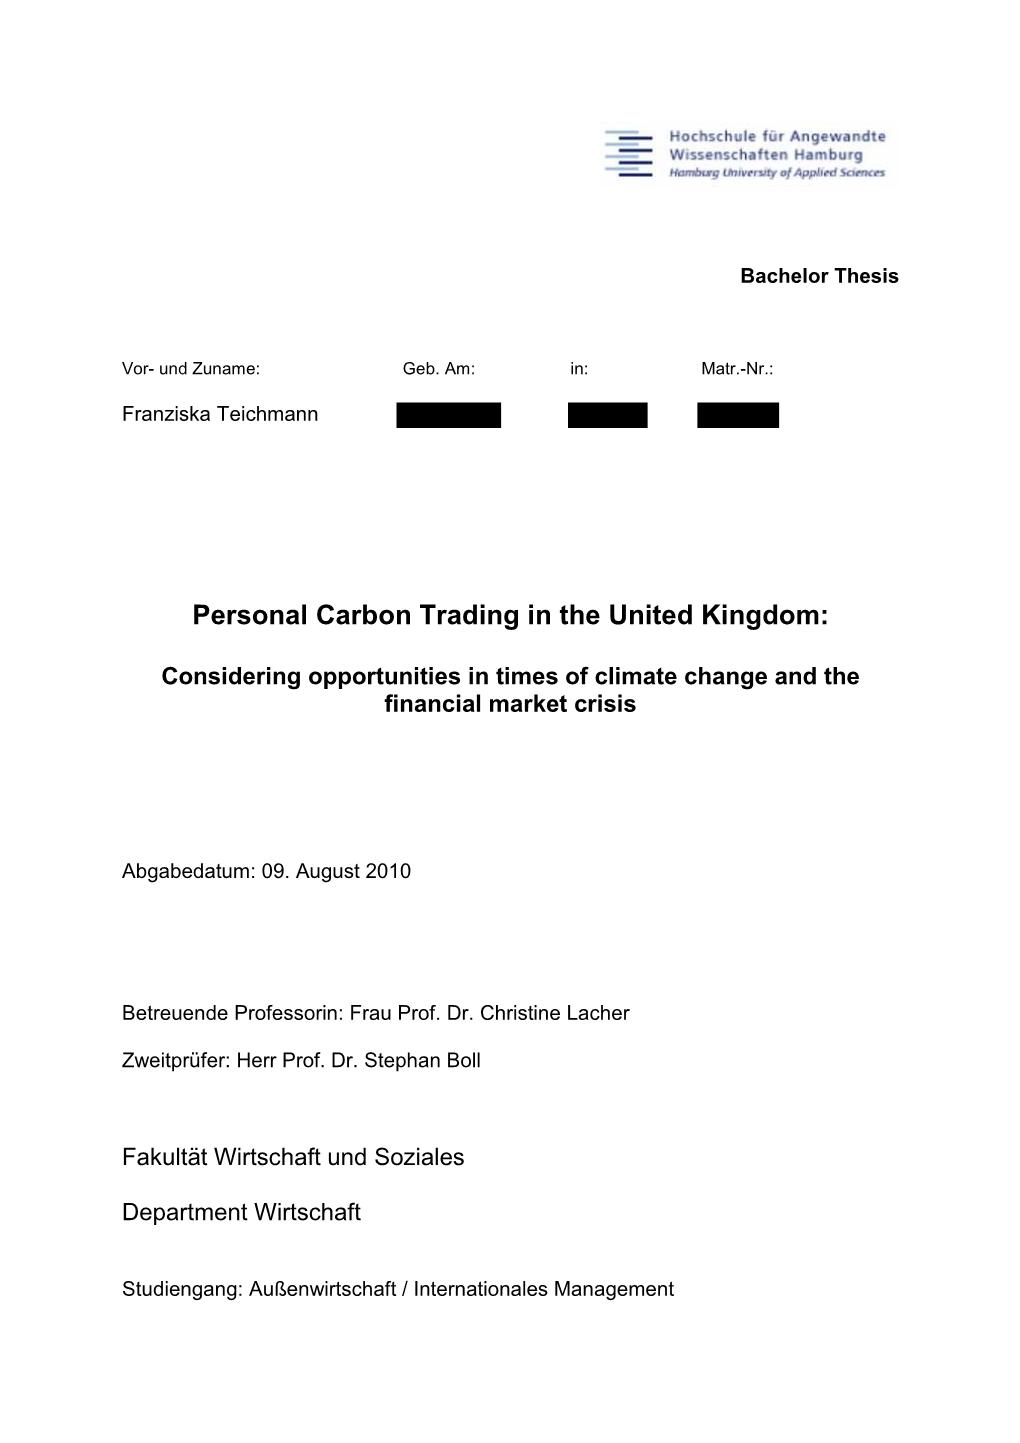 Personal Carbon Trading in the United Kingdom